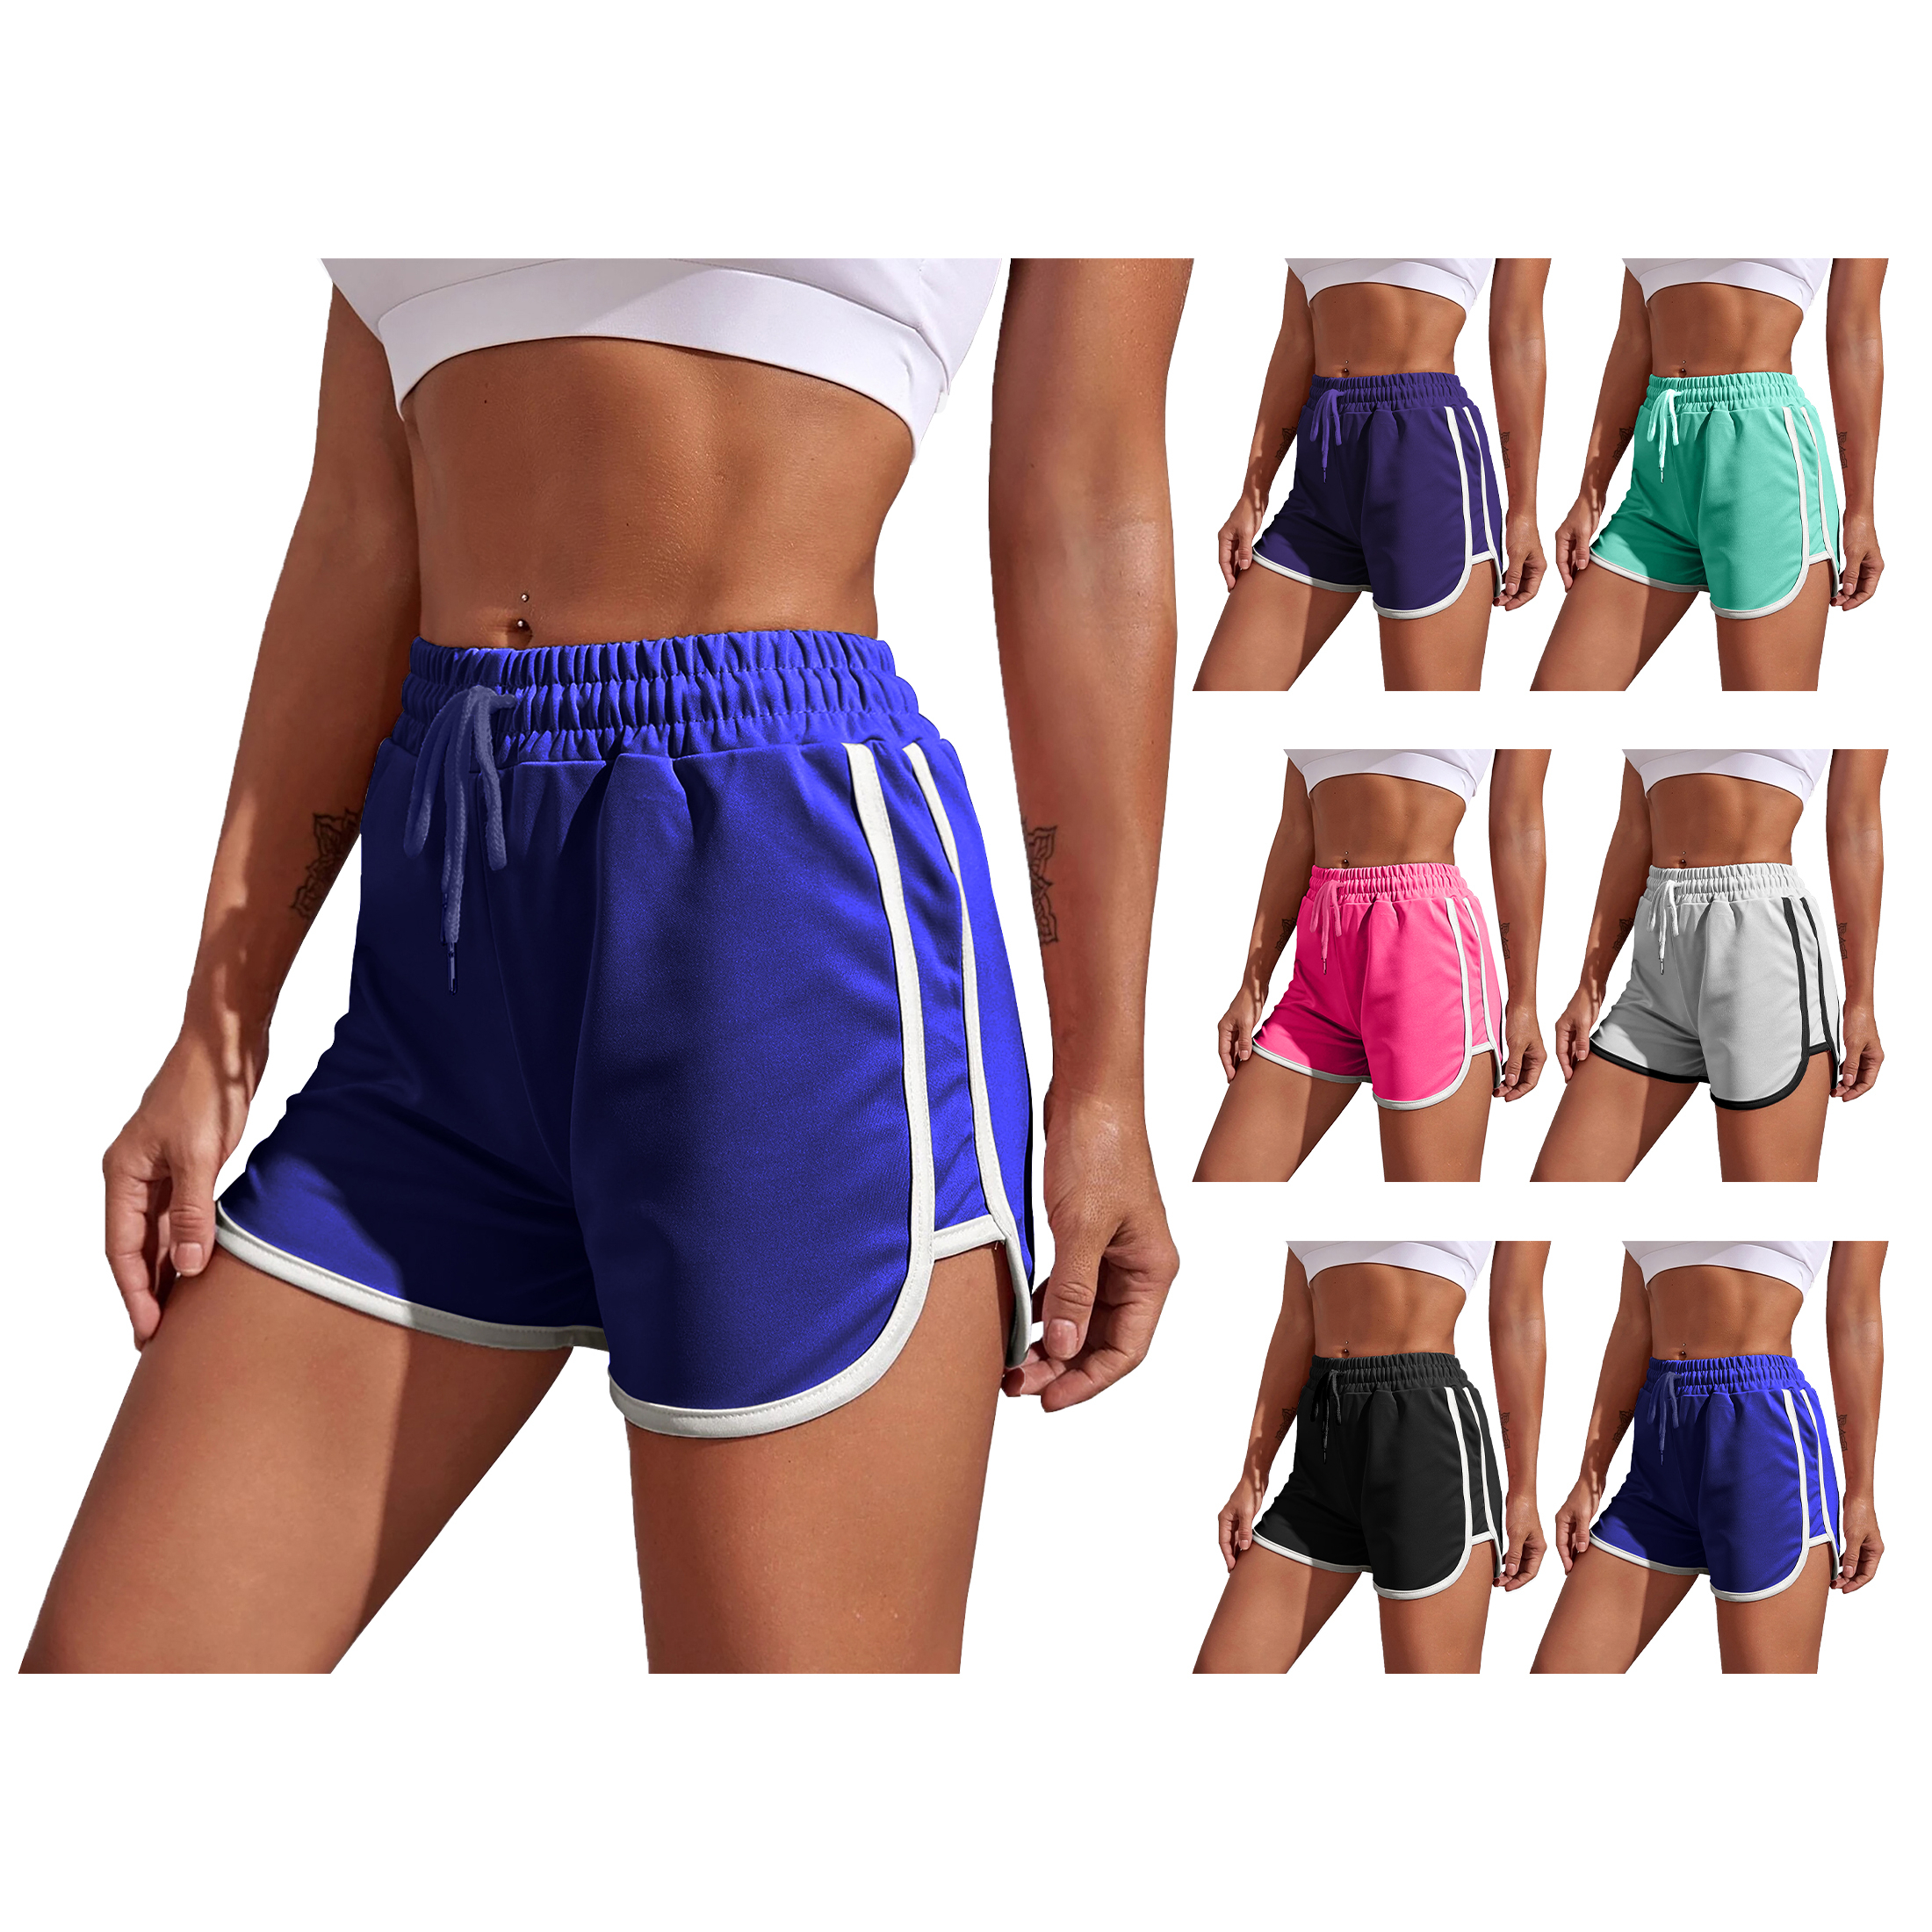 3-Pack Women's Dolphin Shorts Soft Comfy Elastic Waist Running Athletic Workout Yoga Pants - L